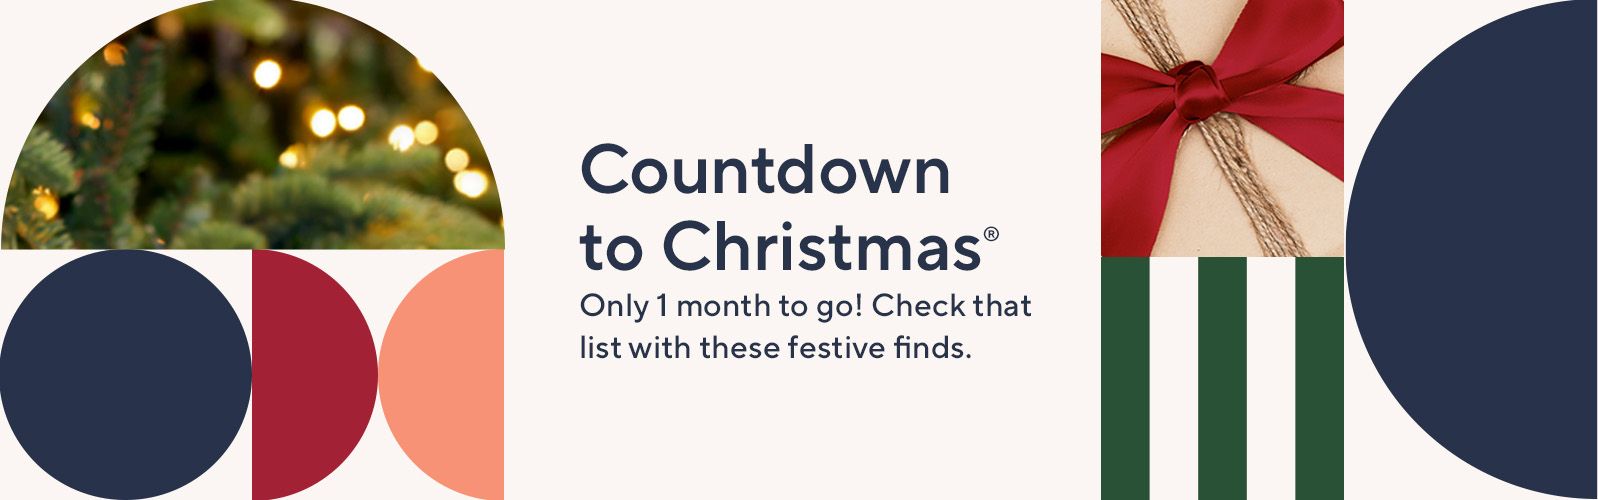 Countdown to Christmas® Only 1 month to go! Check that list with these festive finds.